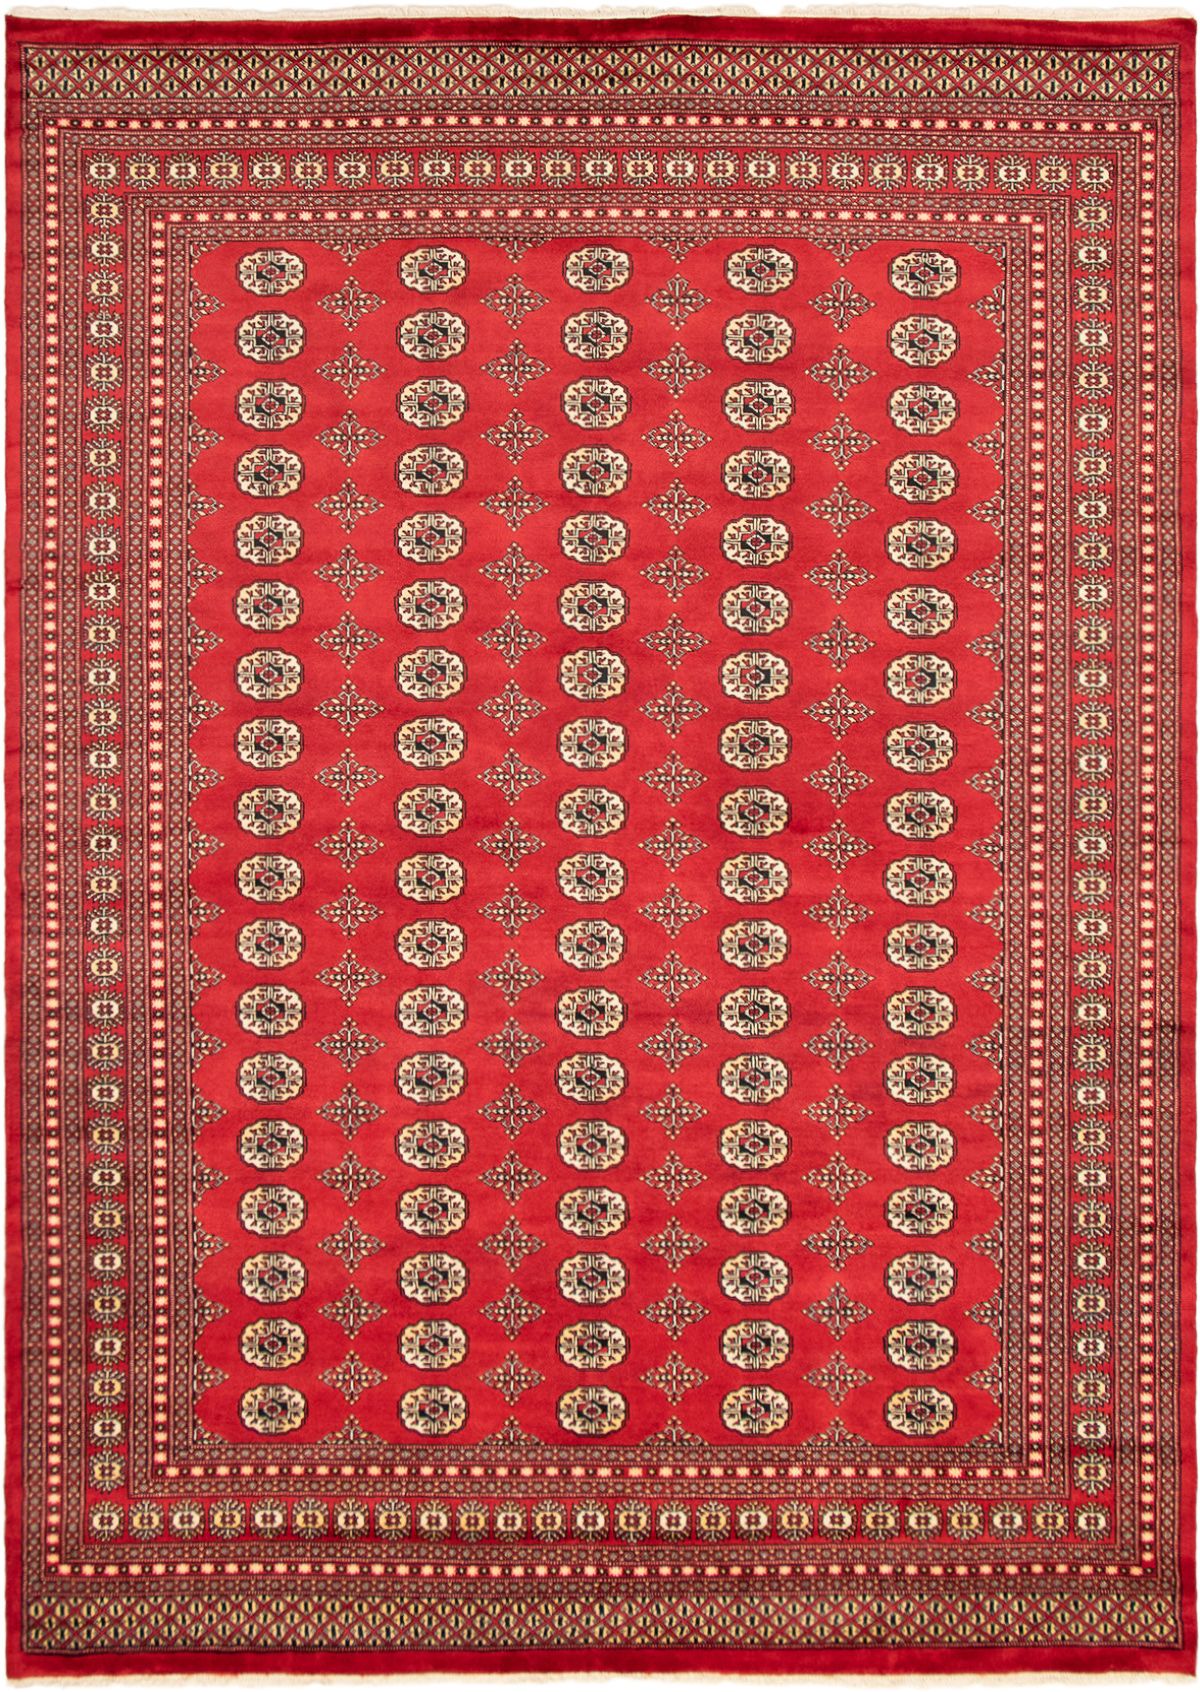 Hand-knotted Finest Peshawar Bokhara Red Wool Rug 8'1" x 9'6" Size: 8'1" x 9'6"  